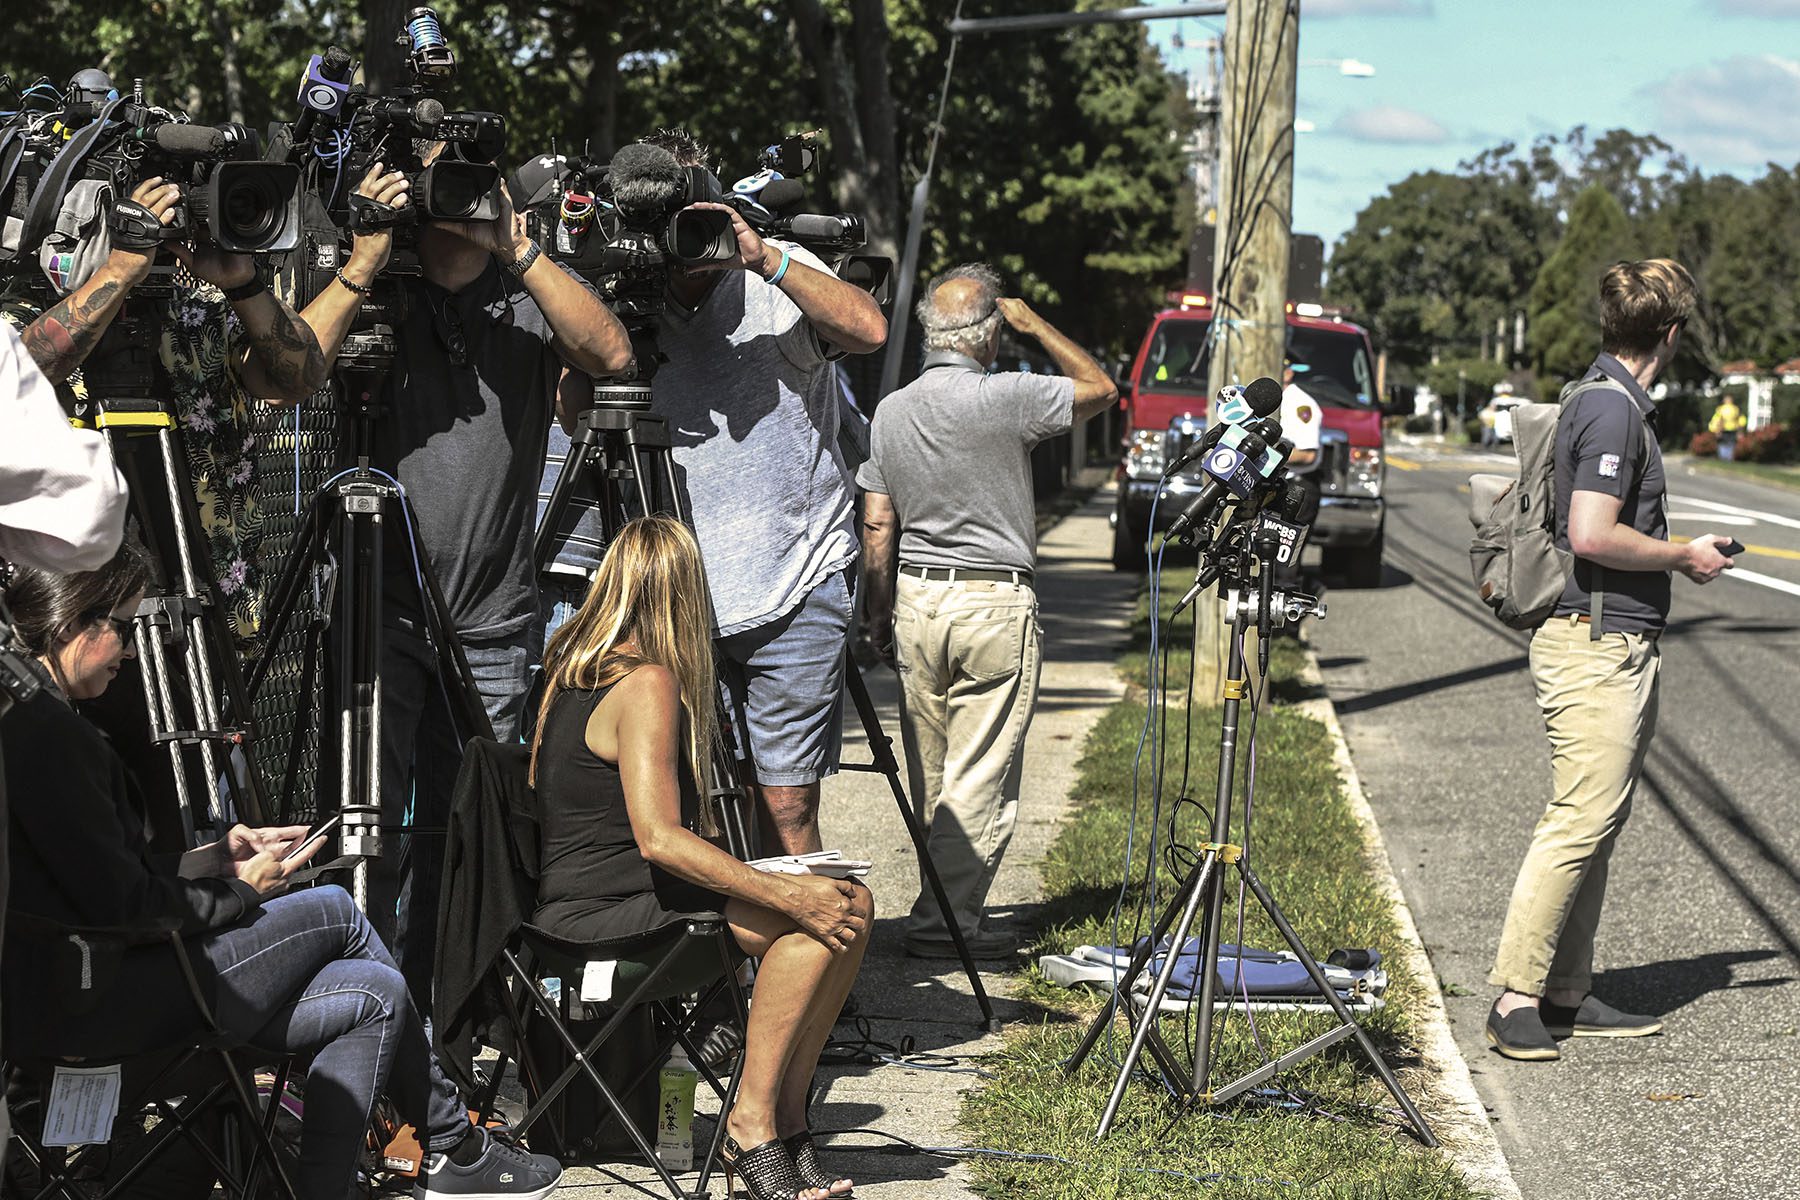 dozens of cameras and microphones, and press are seen on the side of a street.